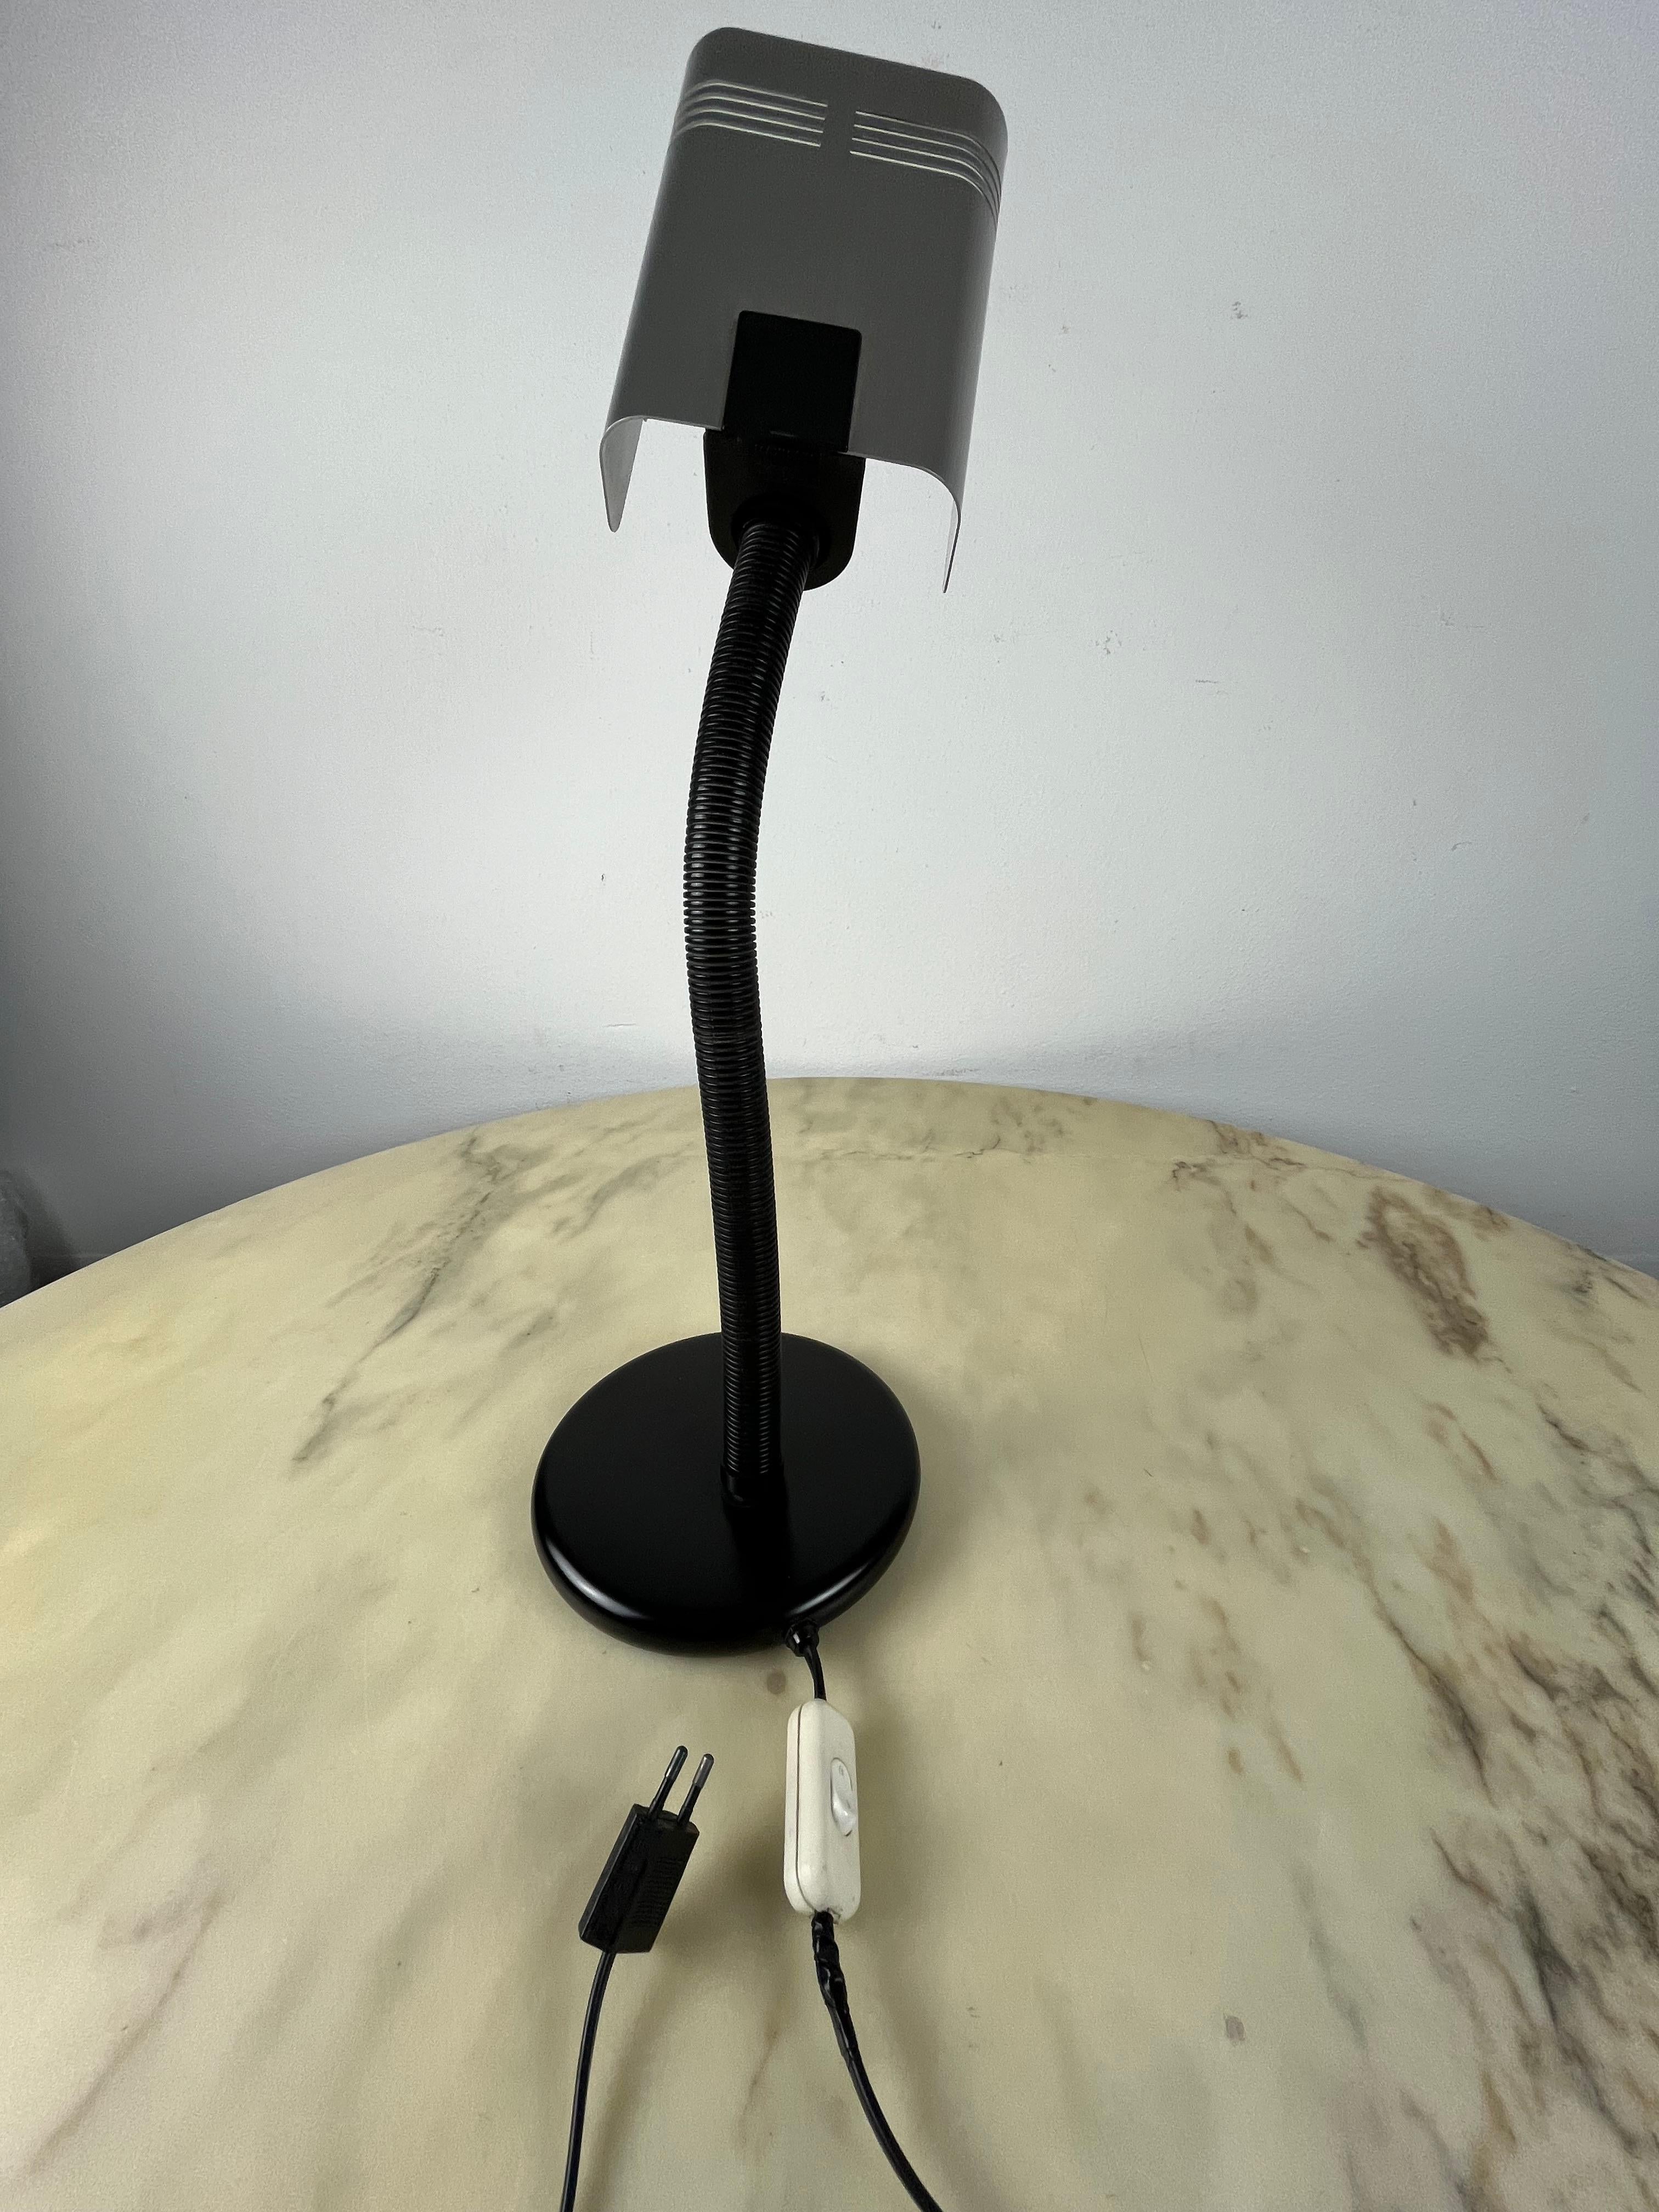 Targetti Sankey table lamp, by Gino Sarfatti, Italy, 1970s
Intact and functional, small signs of aging.
Good conditions.